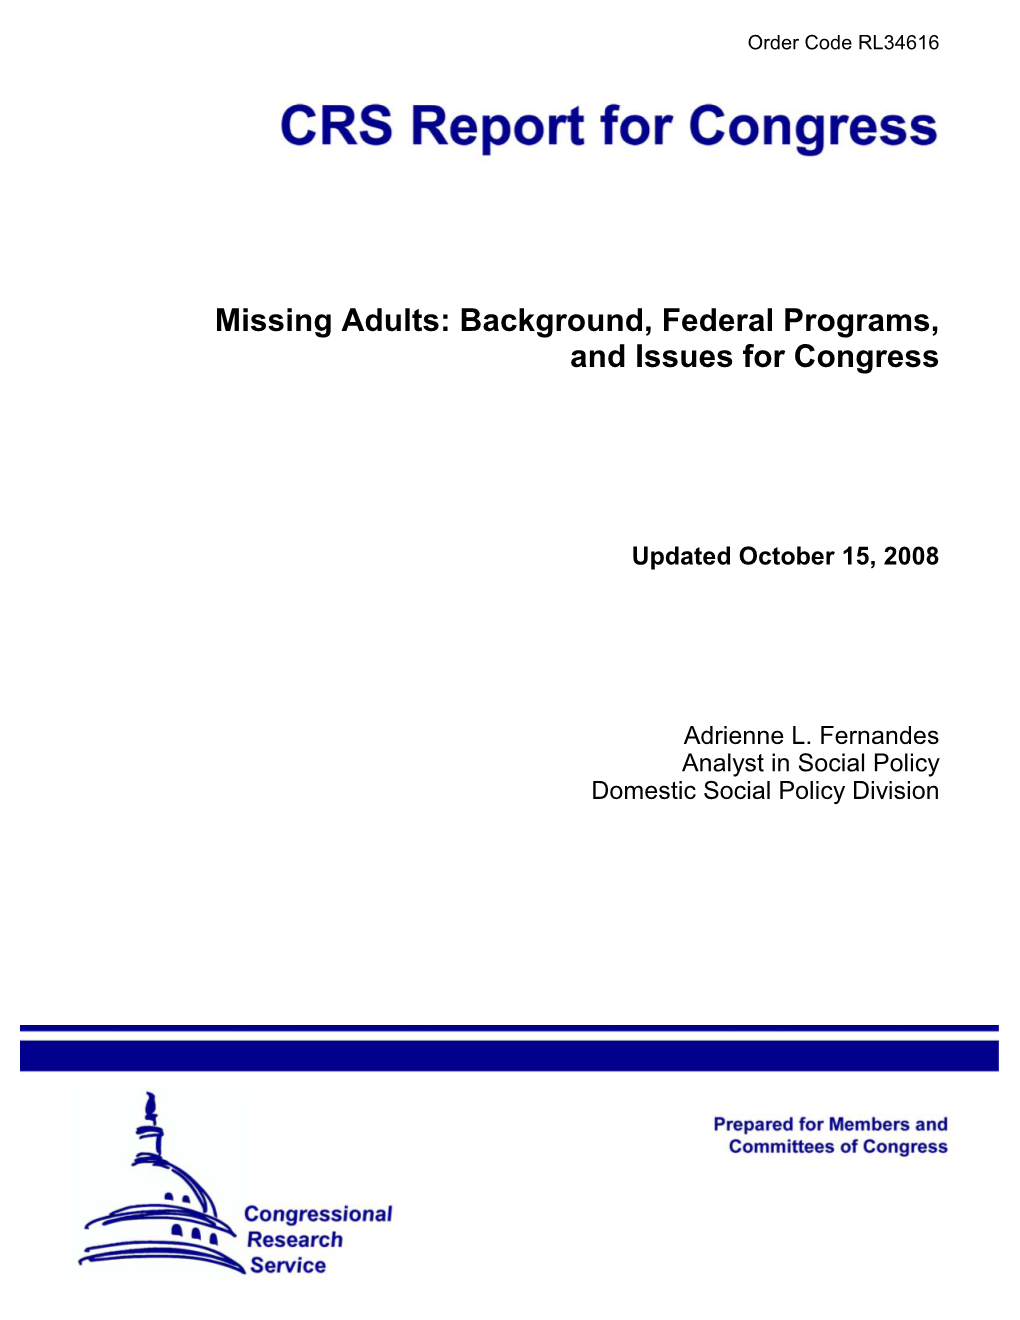 Background, Federal Programs, and Issues for Congress